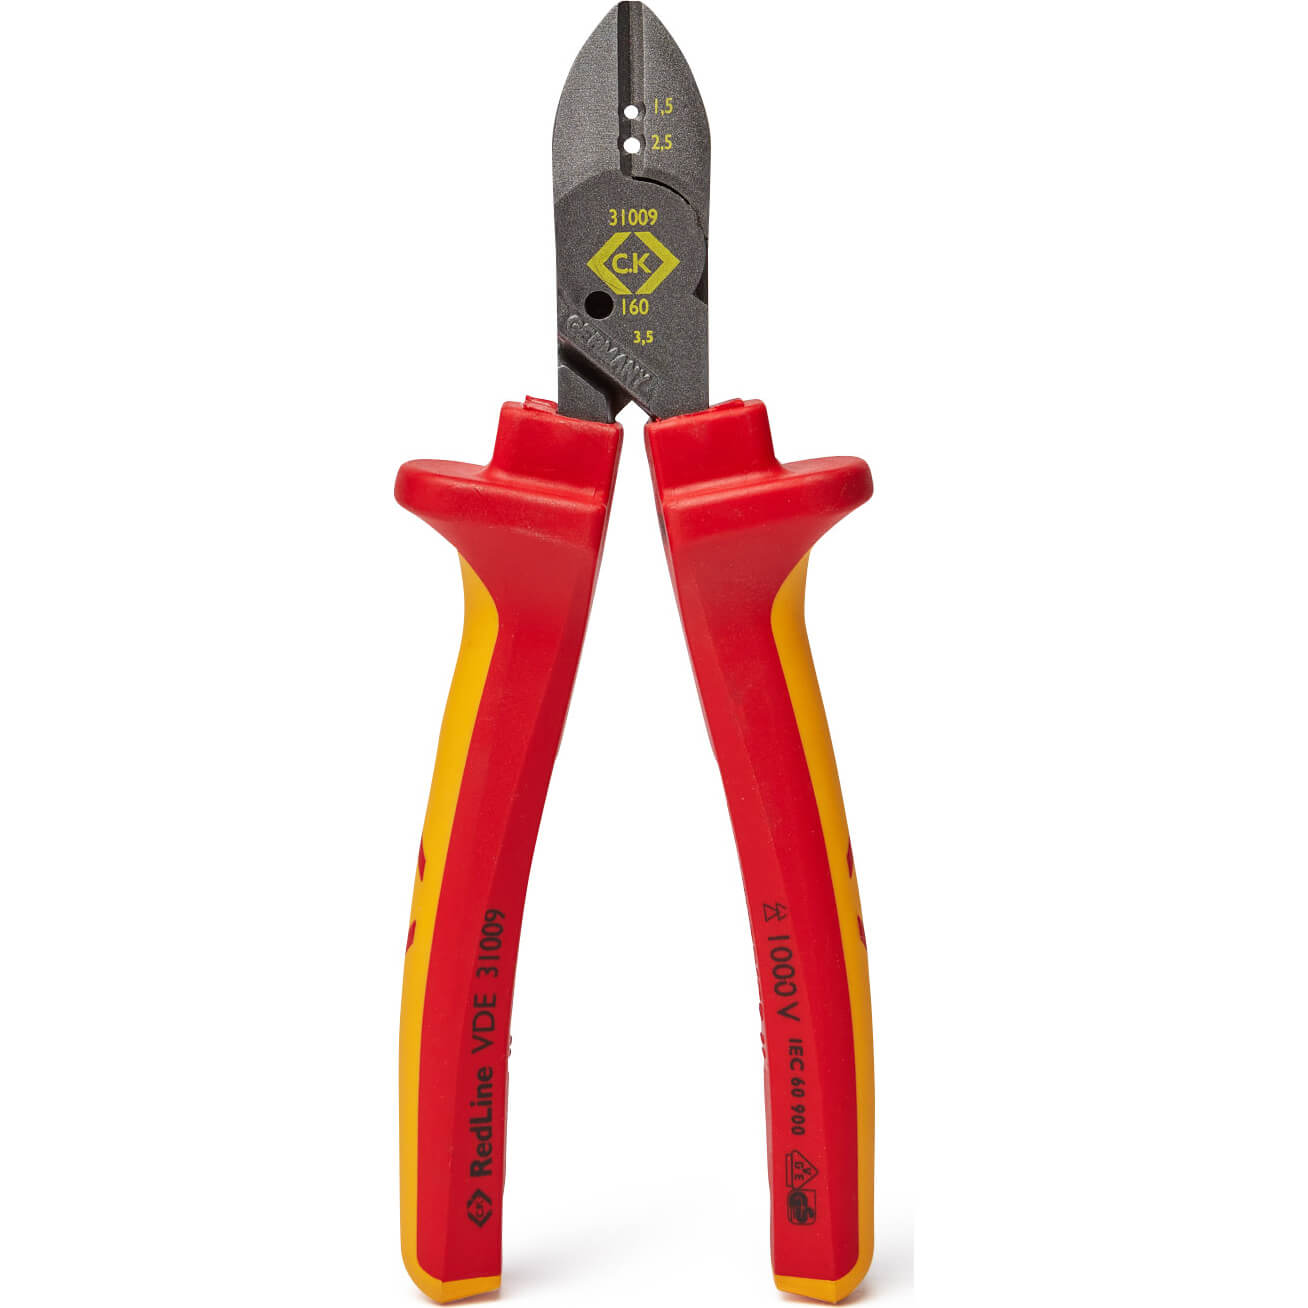 Photos - Utility Knife CK Tools CK RedLine CombiCutter 2 VDE Insulated Electricians Pliers 160mm 431009 